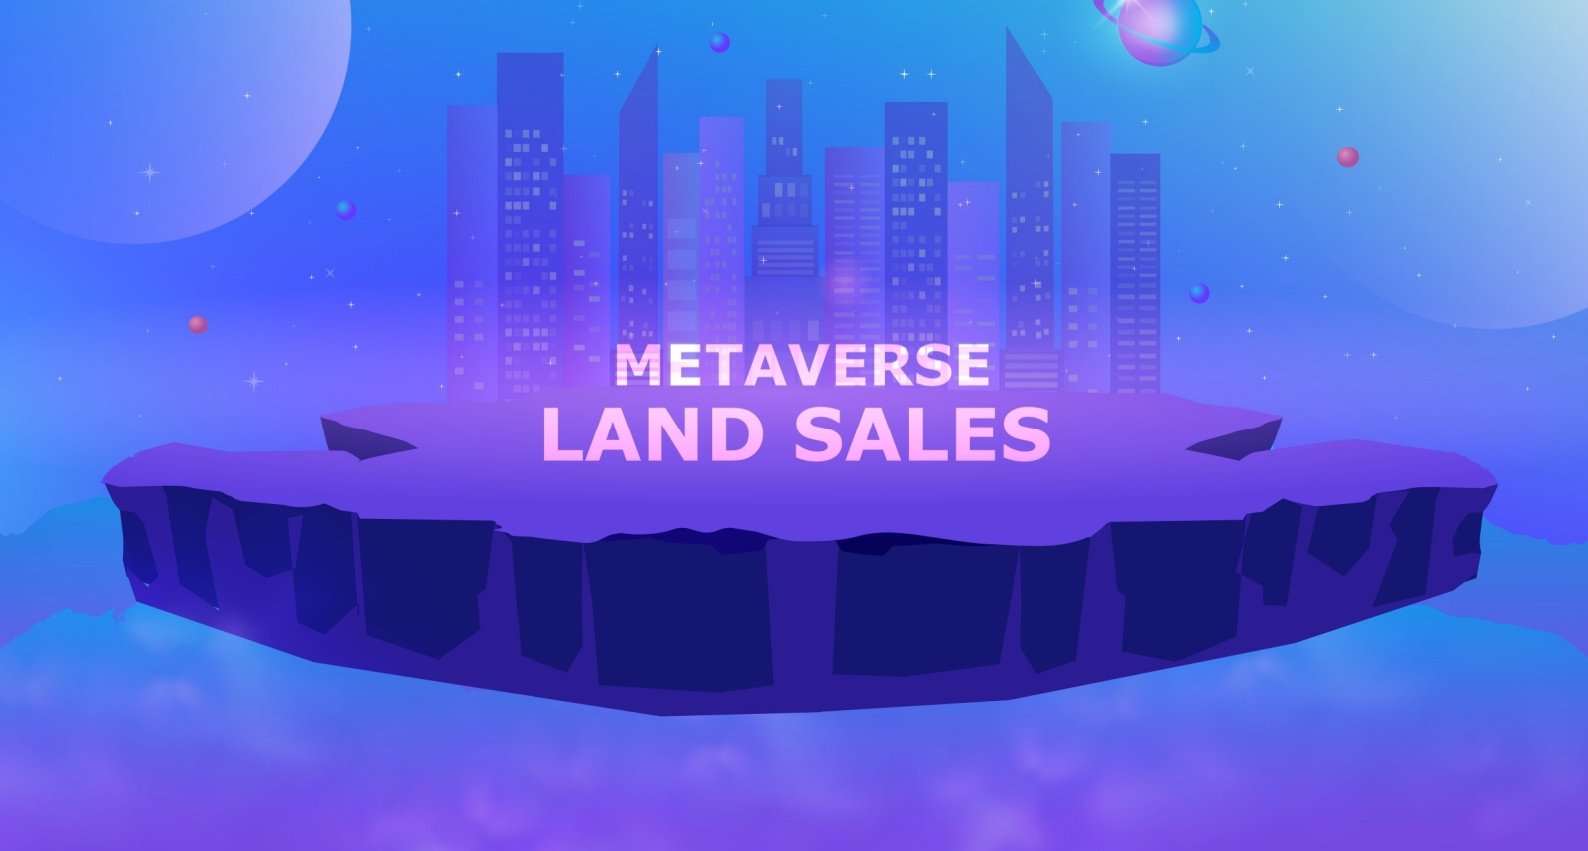 Metaverse land sales soar to new heights